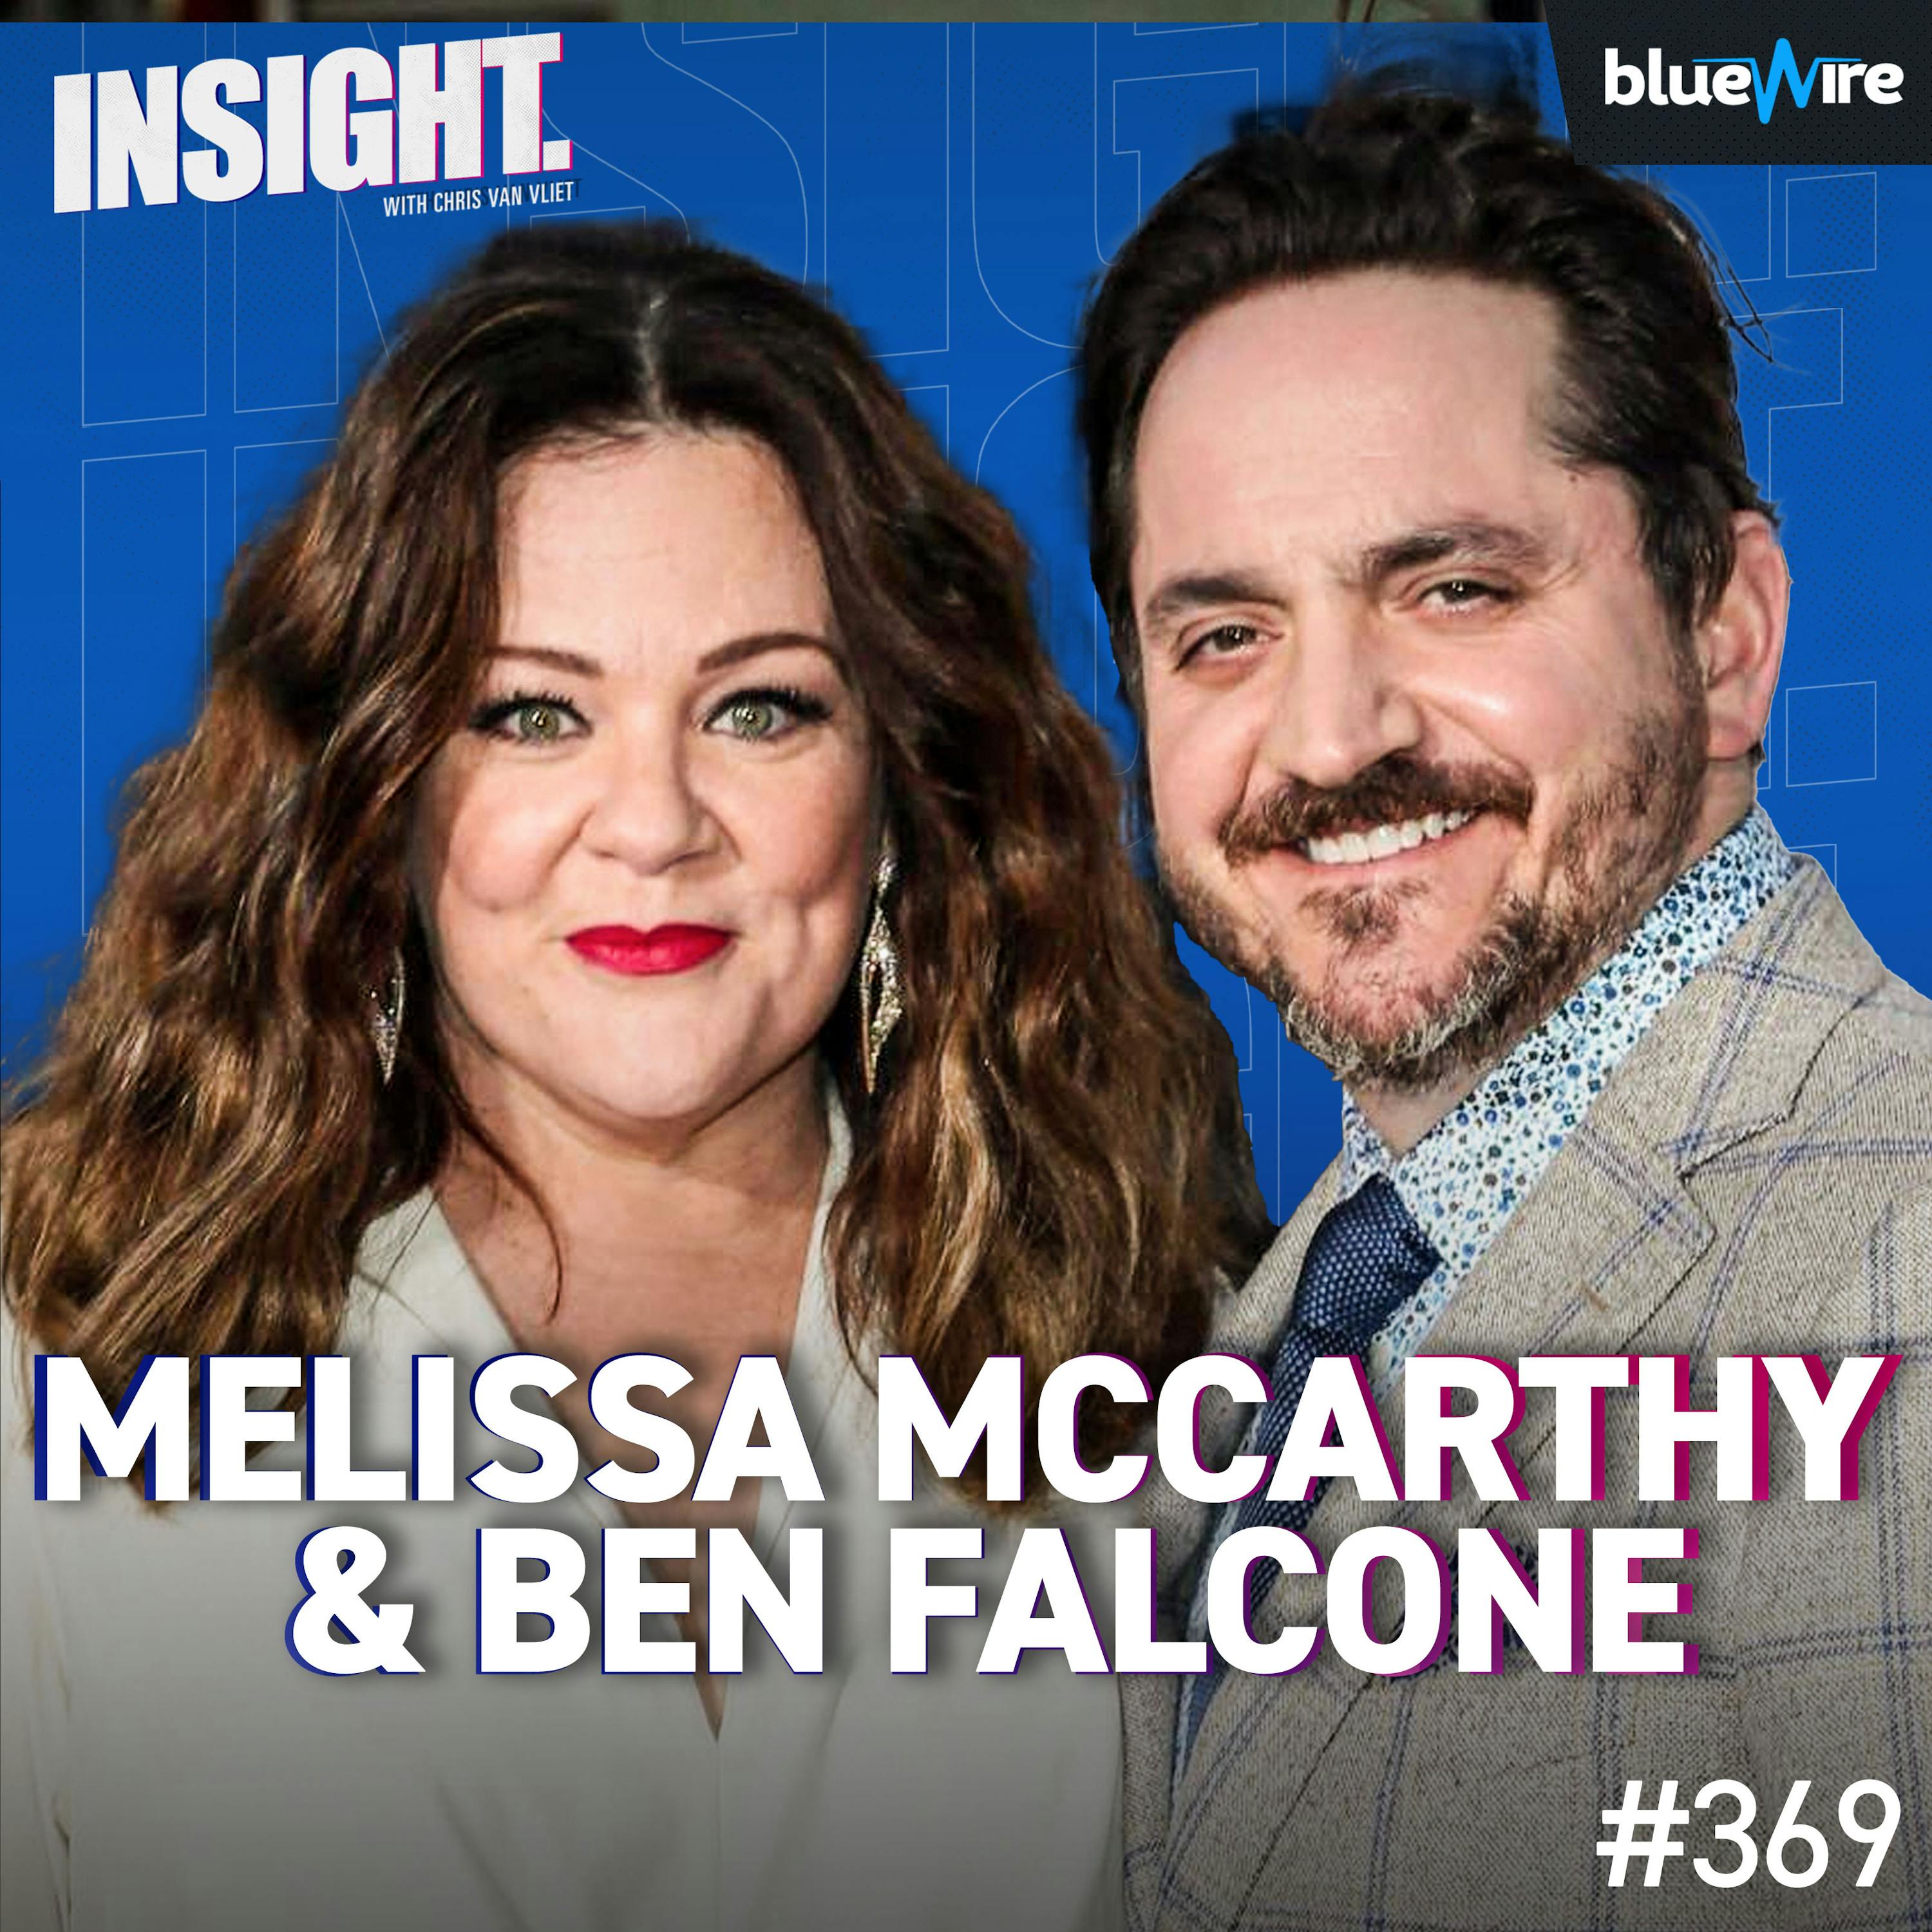 Melissa McCarthy & Ben Falcone - From BRIDESMAIDS to GOD'S FAVORITE IDIOT - Hollywood's Hilarious Power Couple